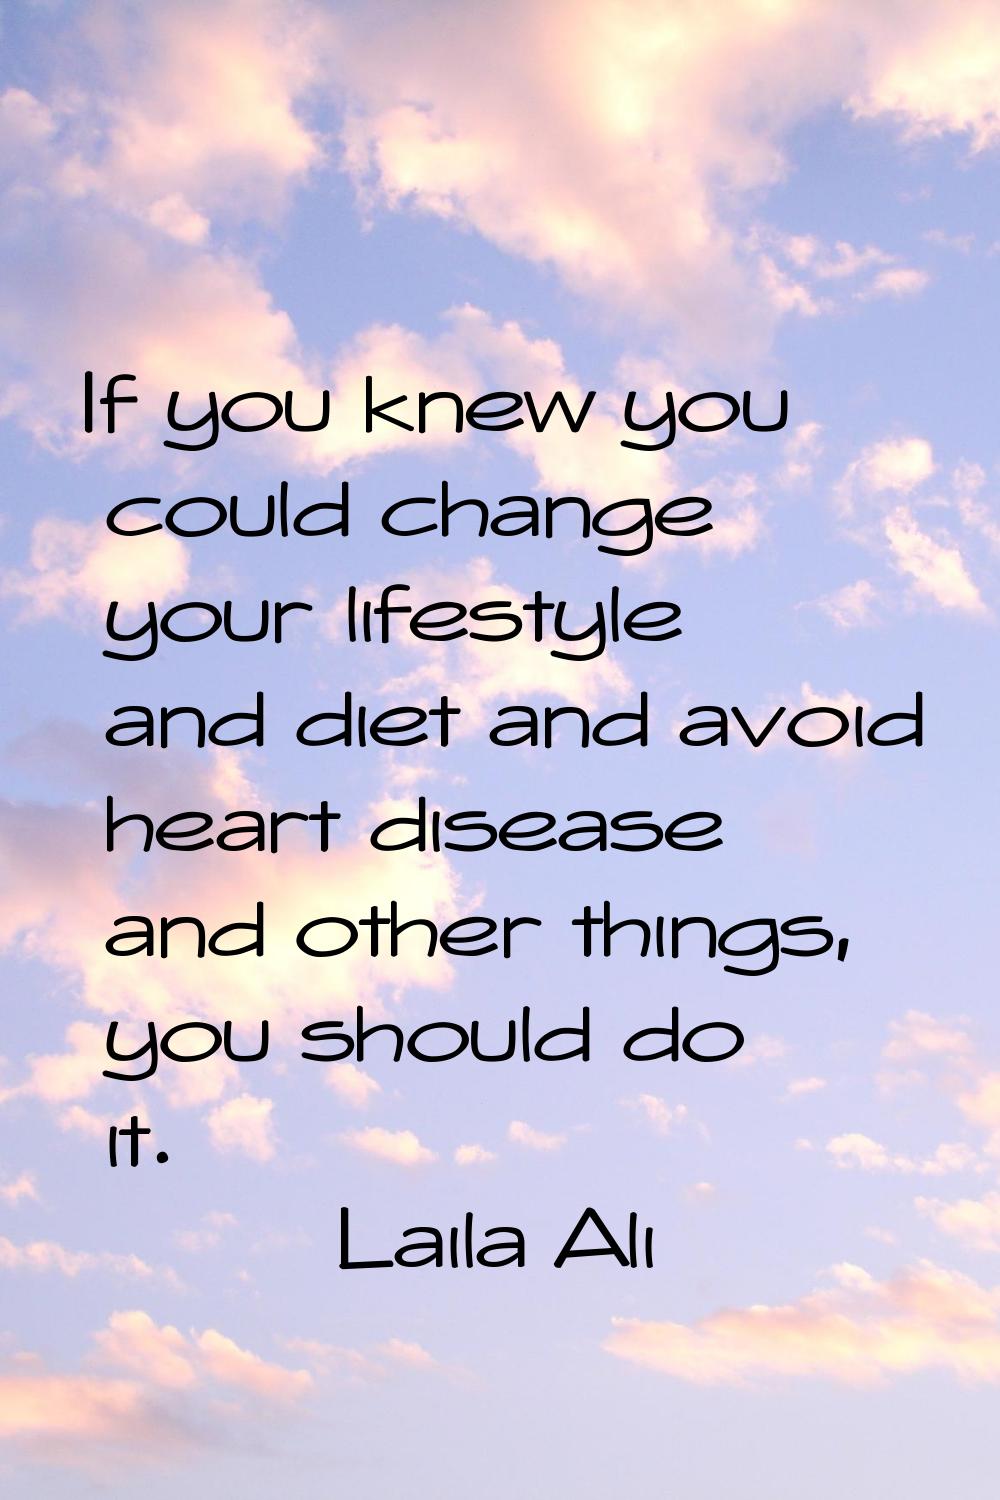 If you knew you could change your lifestyle and diet and avoid heart disease and other things, you 